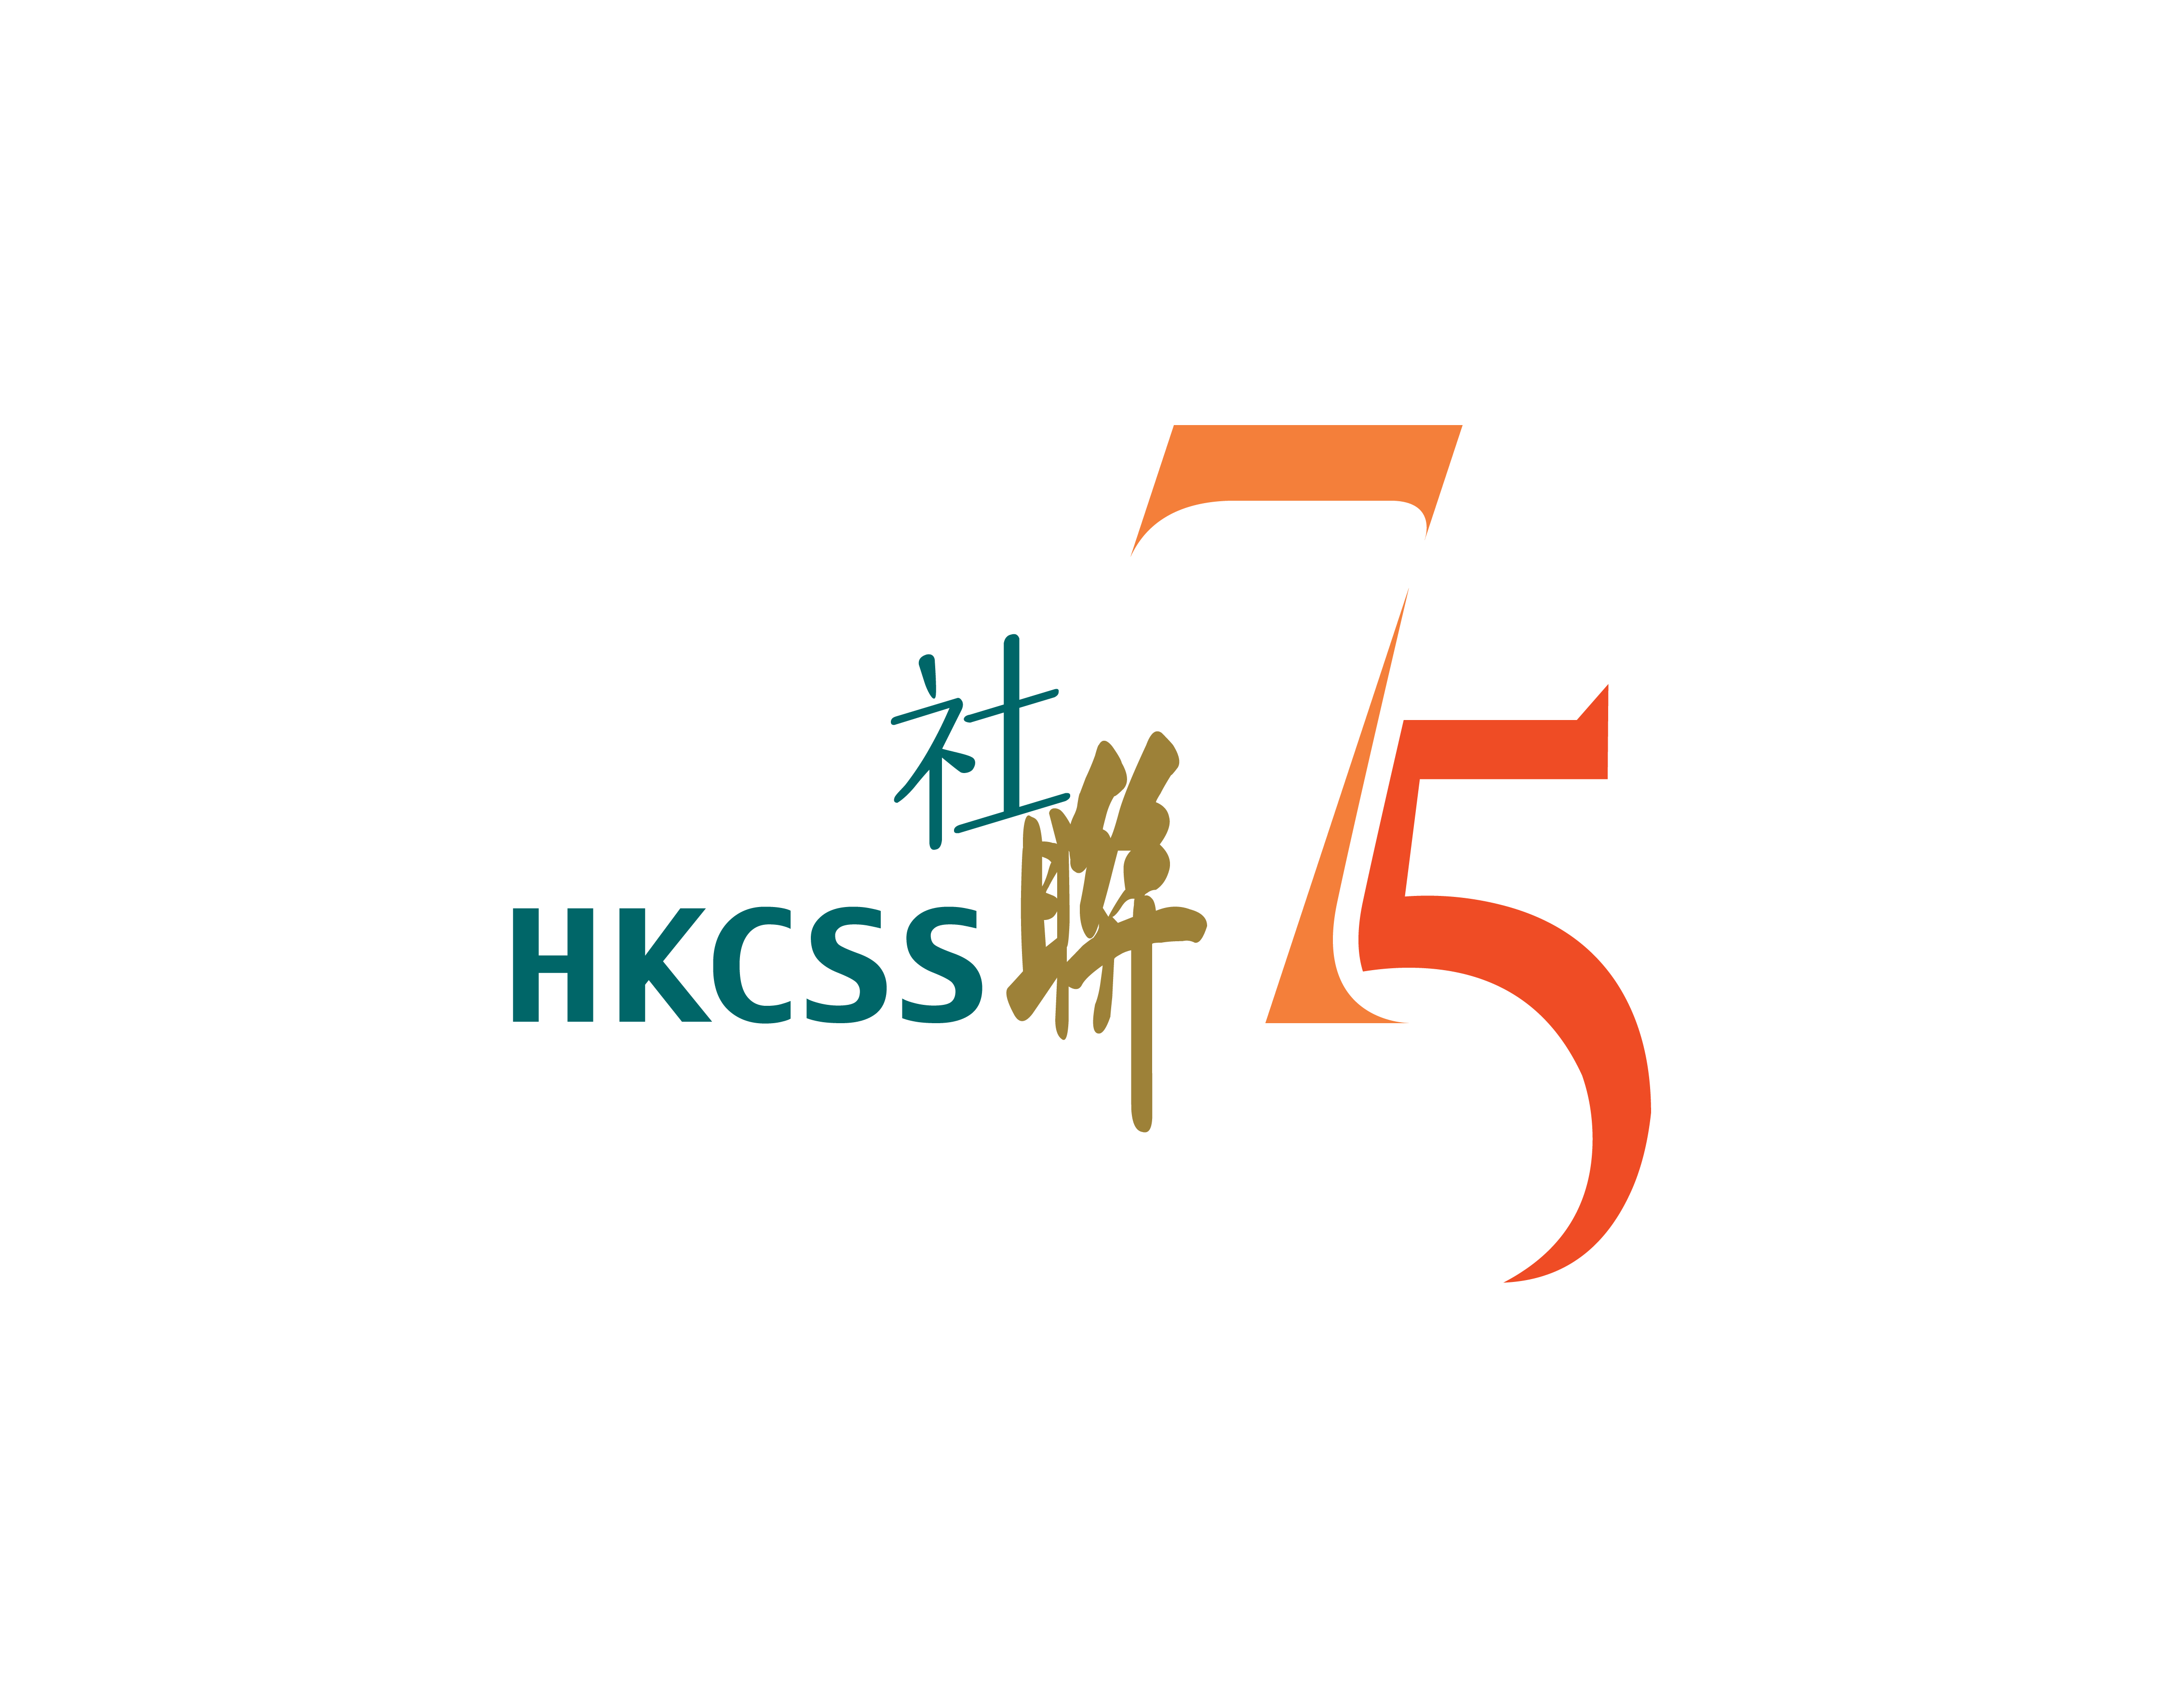 The Hong Kong Council of Social Service (HKCSS) 香港社會服務聯會 (社聯)